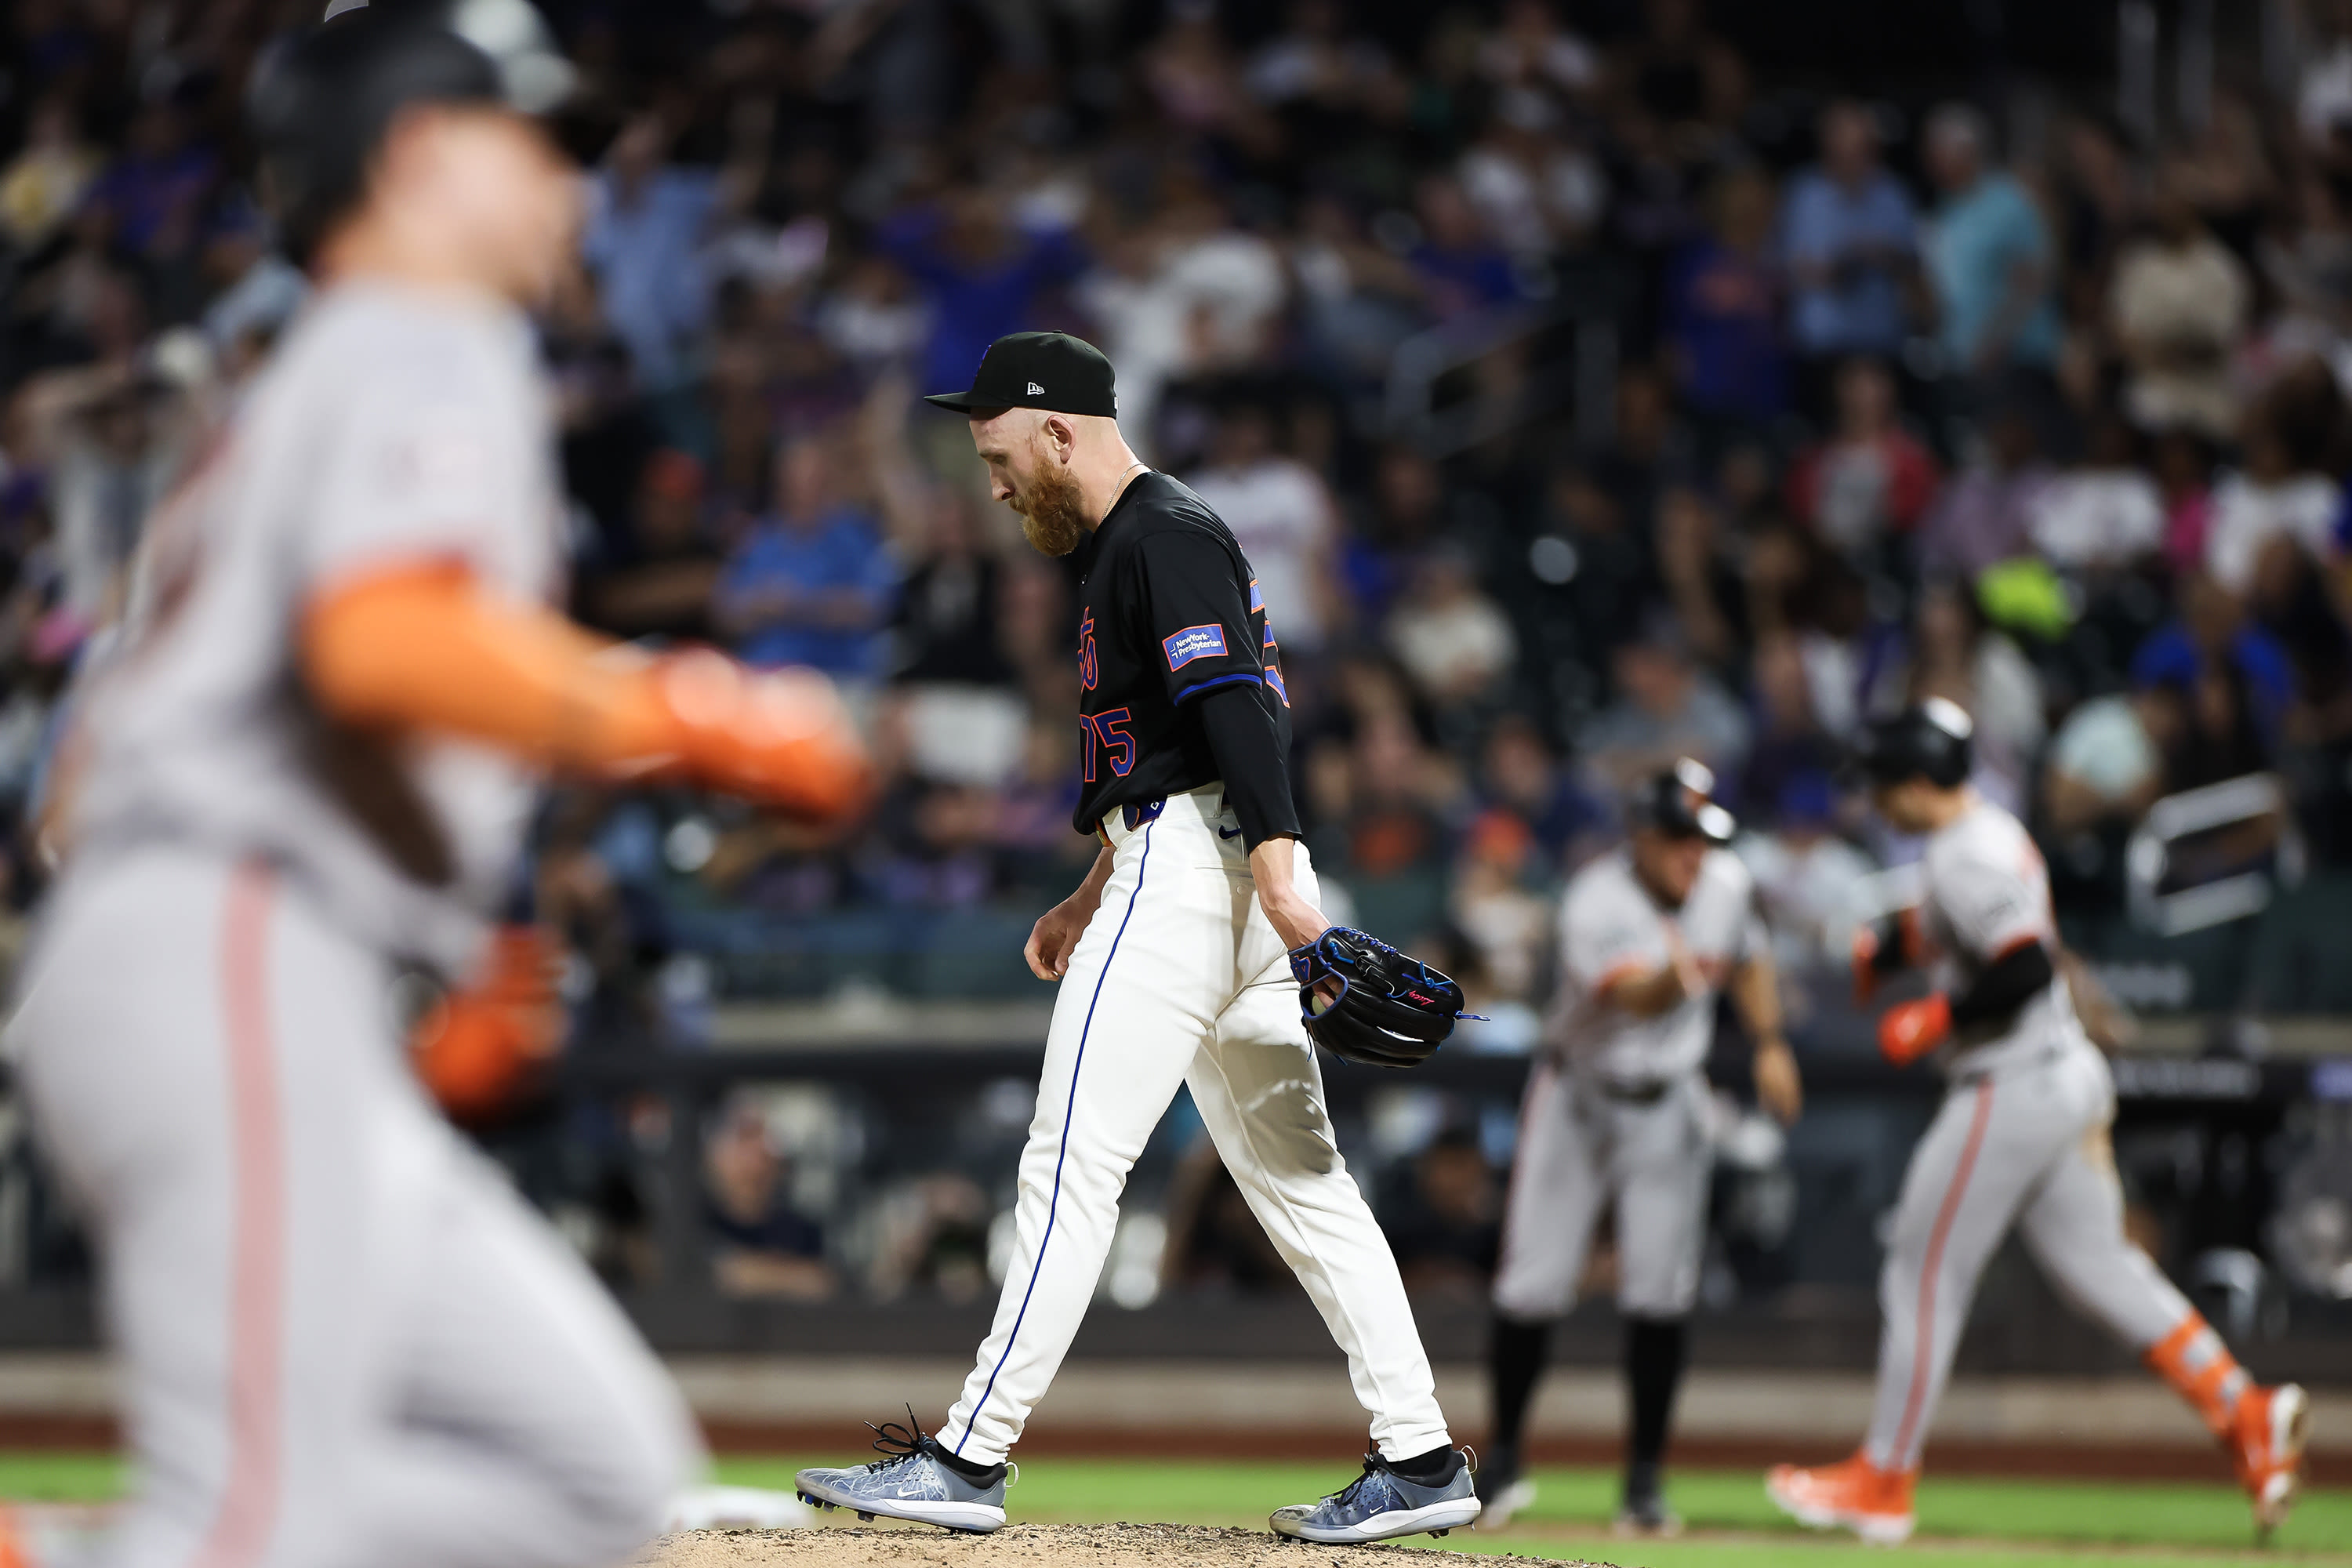 Reed Garrett blows lead in 8th inning as Giants hand Mets 4th straight loss